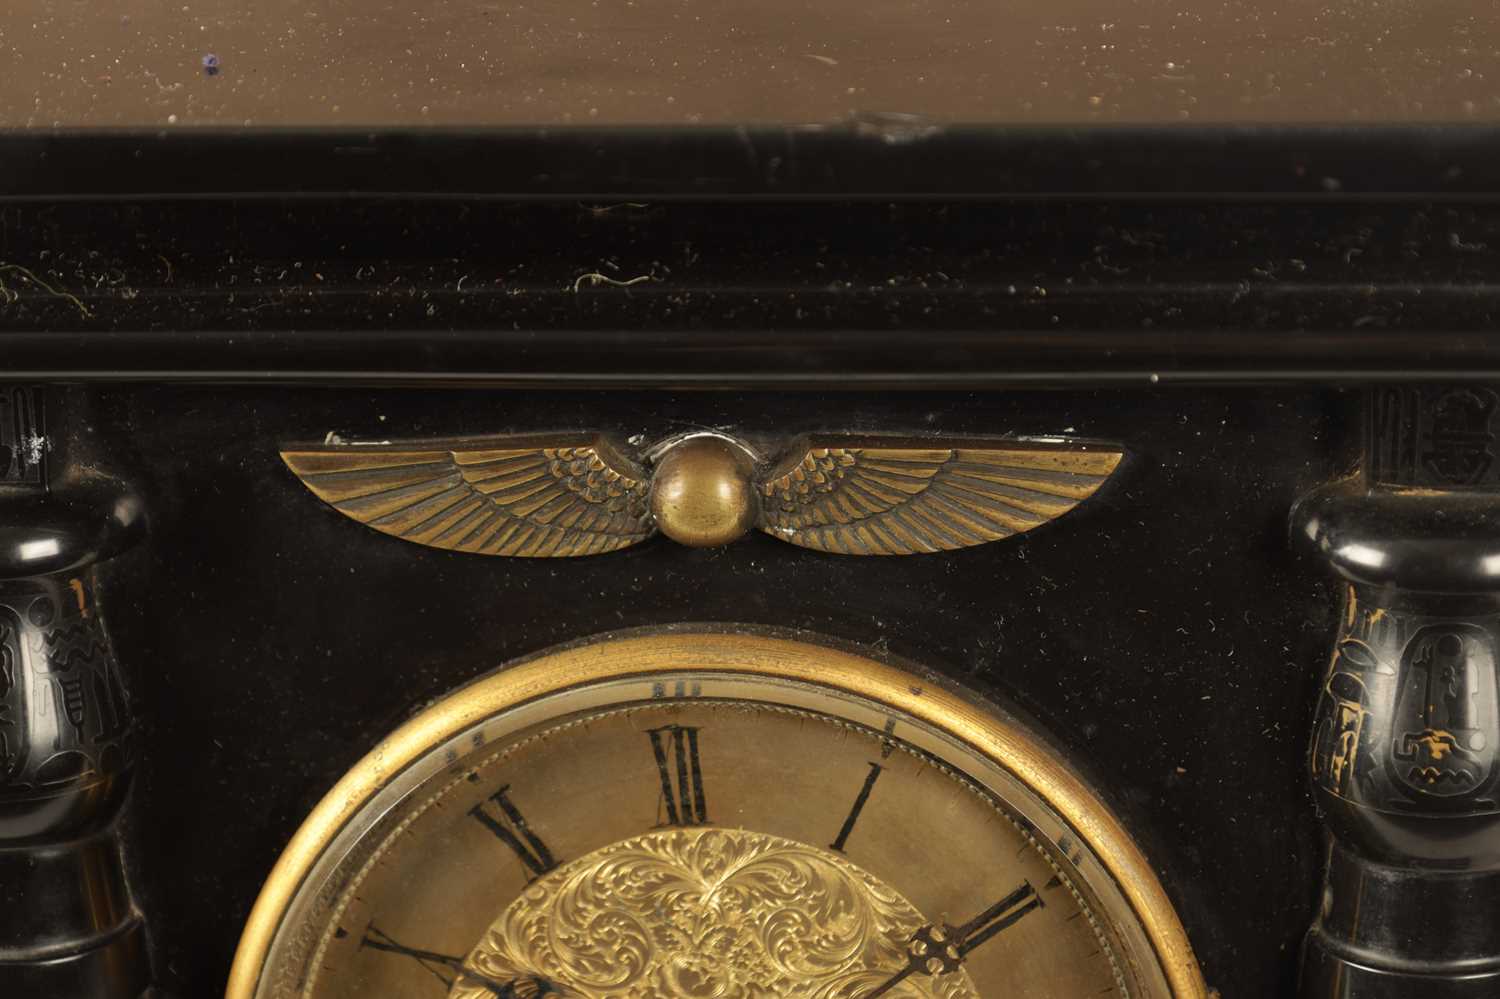 AN ENGLISH REGENCY EGYPTIAN REVIVAL FUSEE MANTEL CLOCK - Image 3 of 12